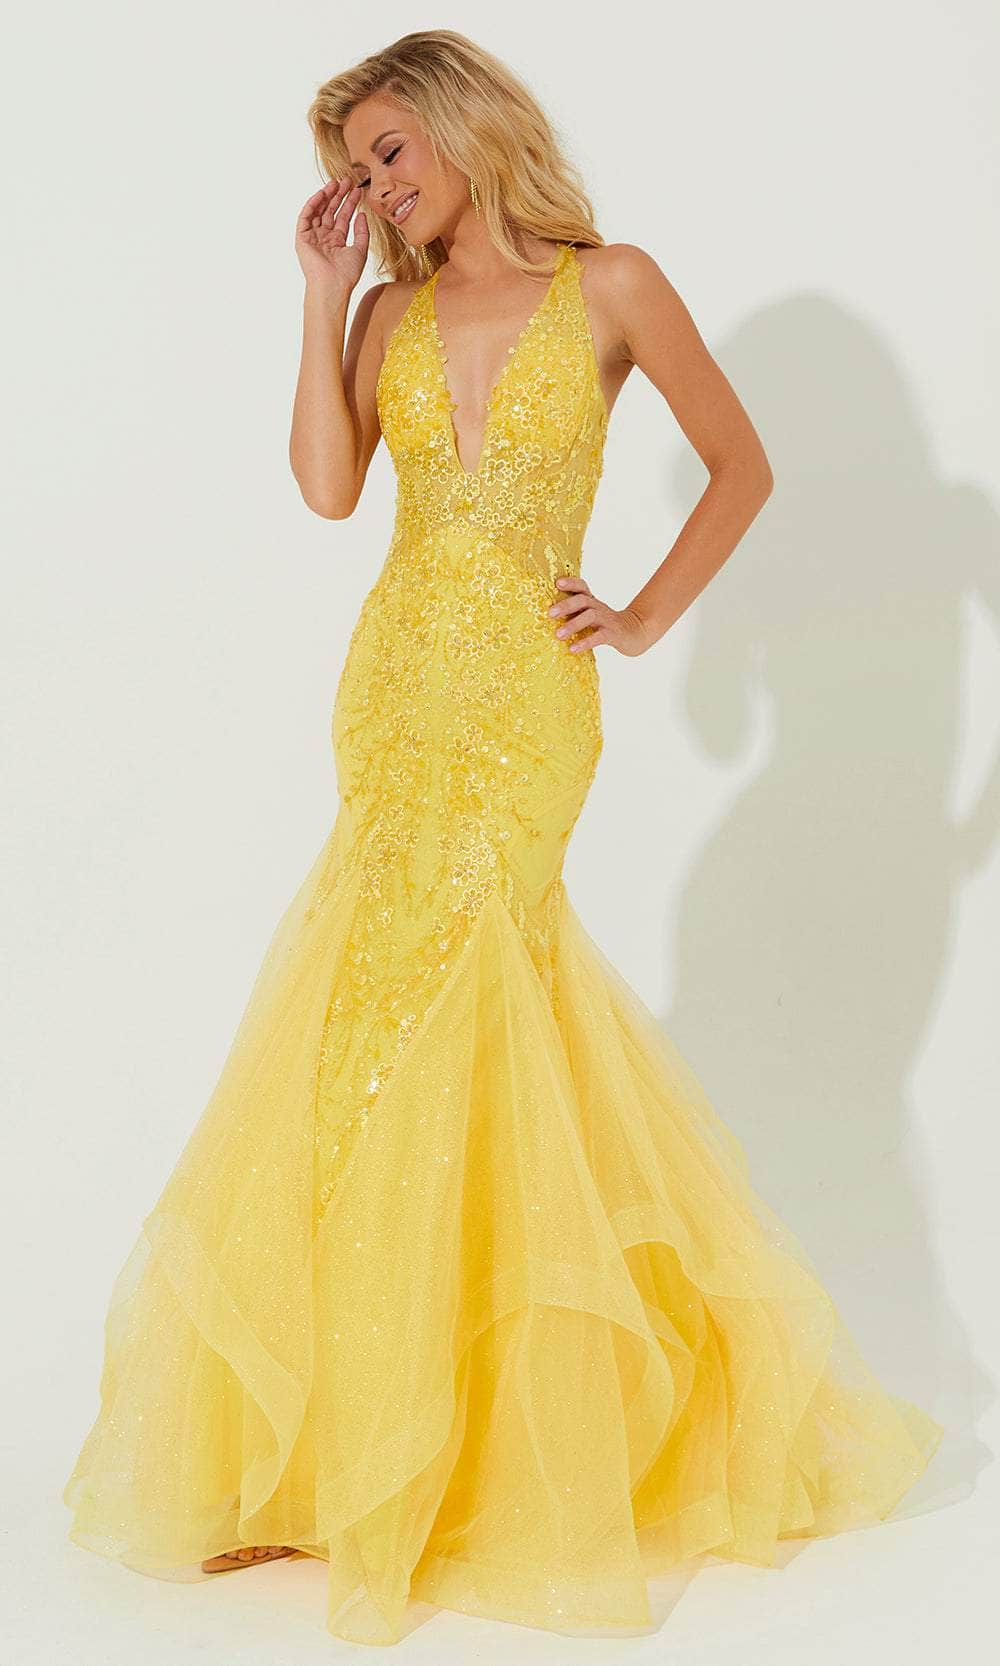 Jasz Couture 7571 - Floral Applique Embellished Sleeveless Dress Special Occasion Dress 00 / Yellow